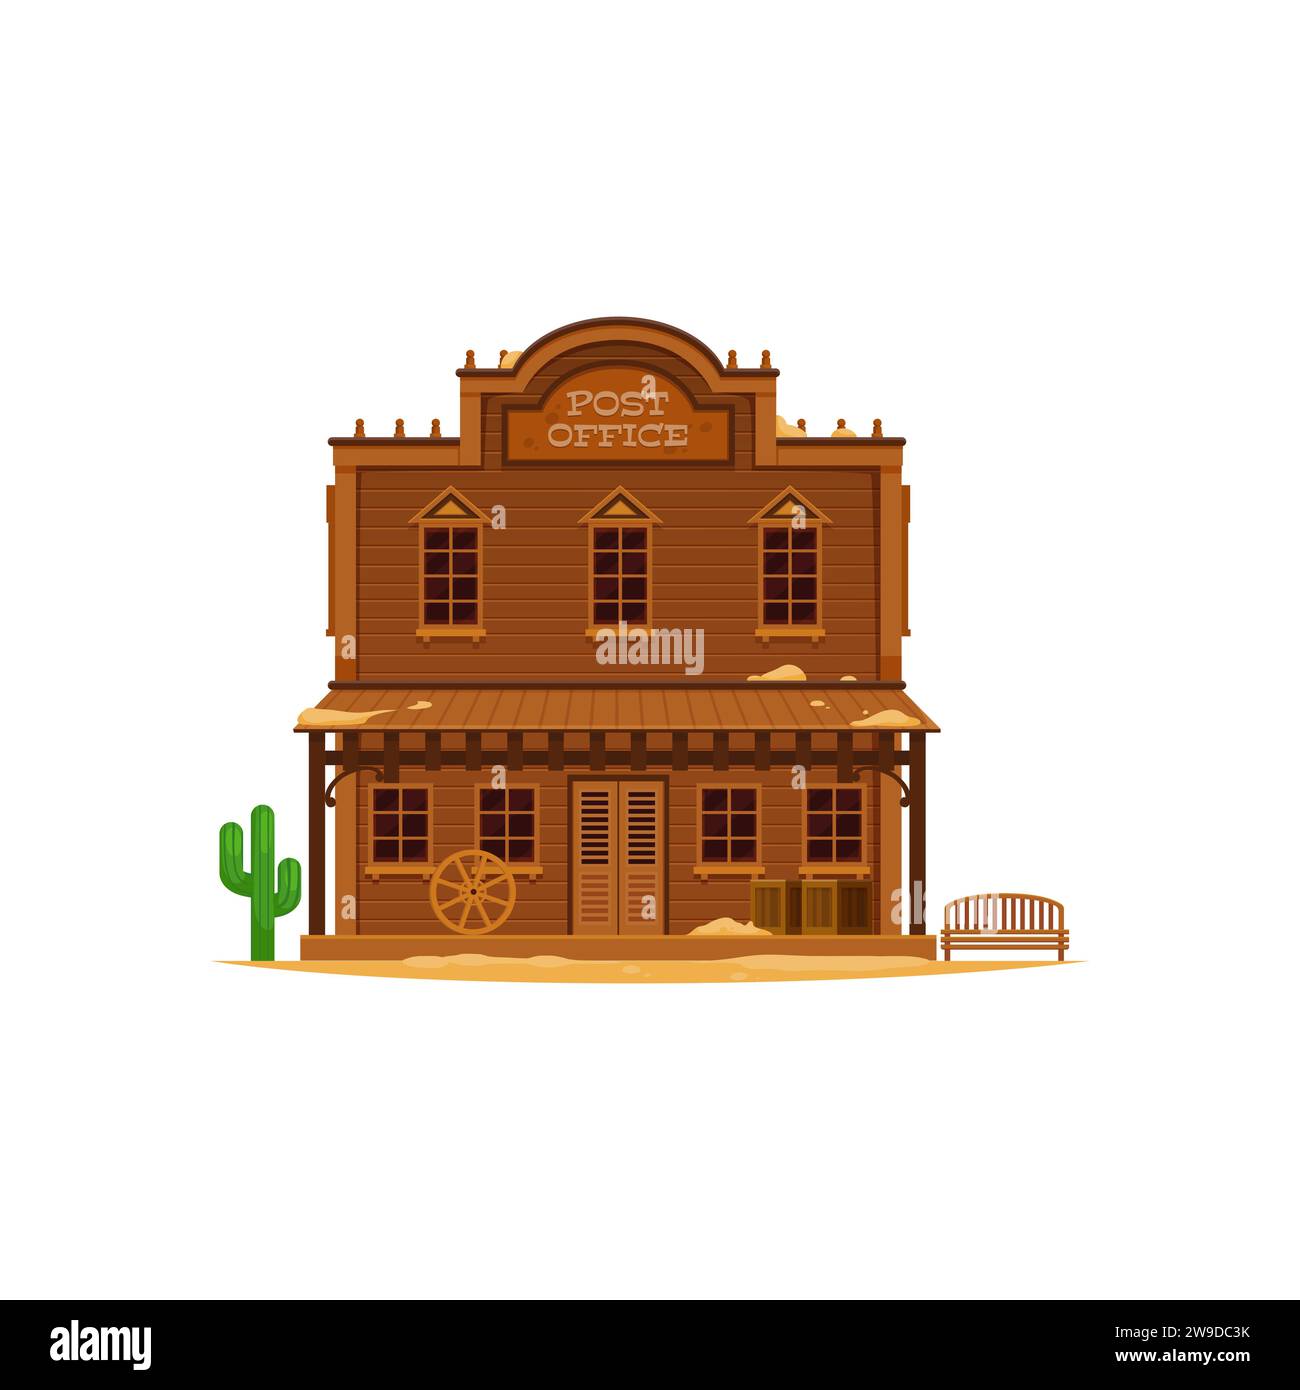 Western Wild West town post office cartoon building. Cowboy city street vector scene with old wood two storey house. Vintage Western post office with parcels on porch, cactus, wagon wheel and bench Stock Vector